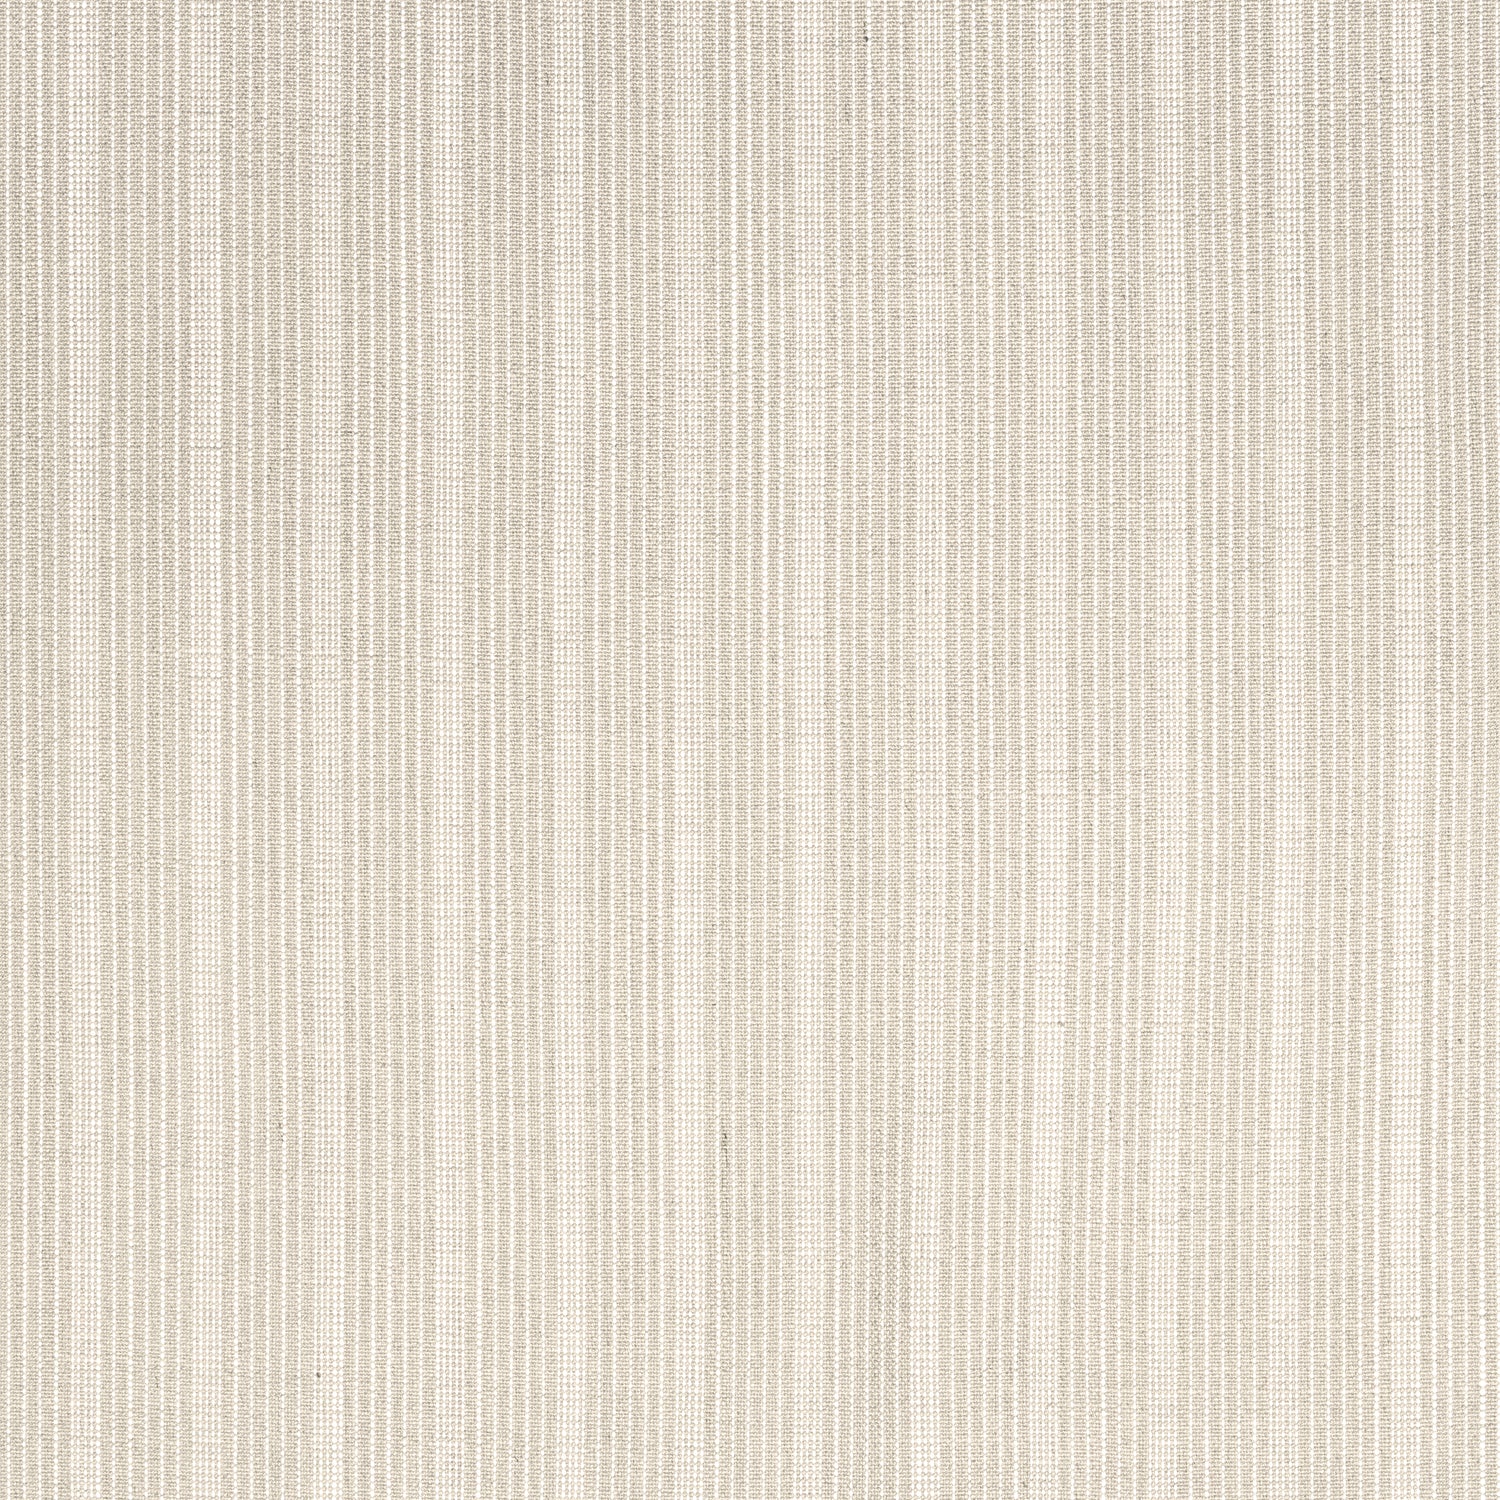 Ebro Stripe fabric in sand color - pattern number W8506 - by Thibaut in the Villa collection